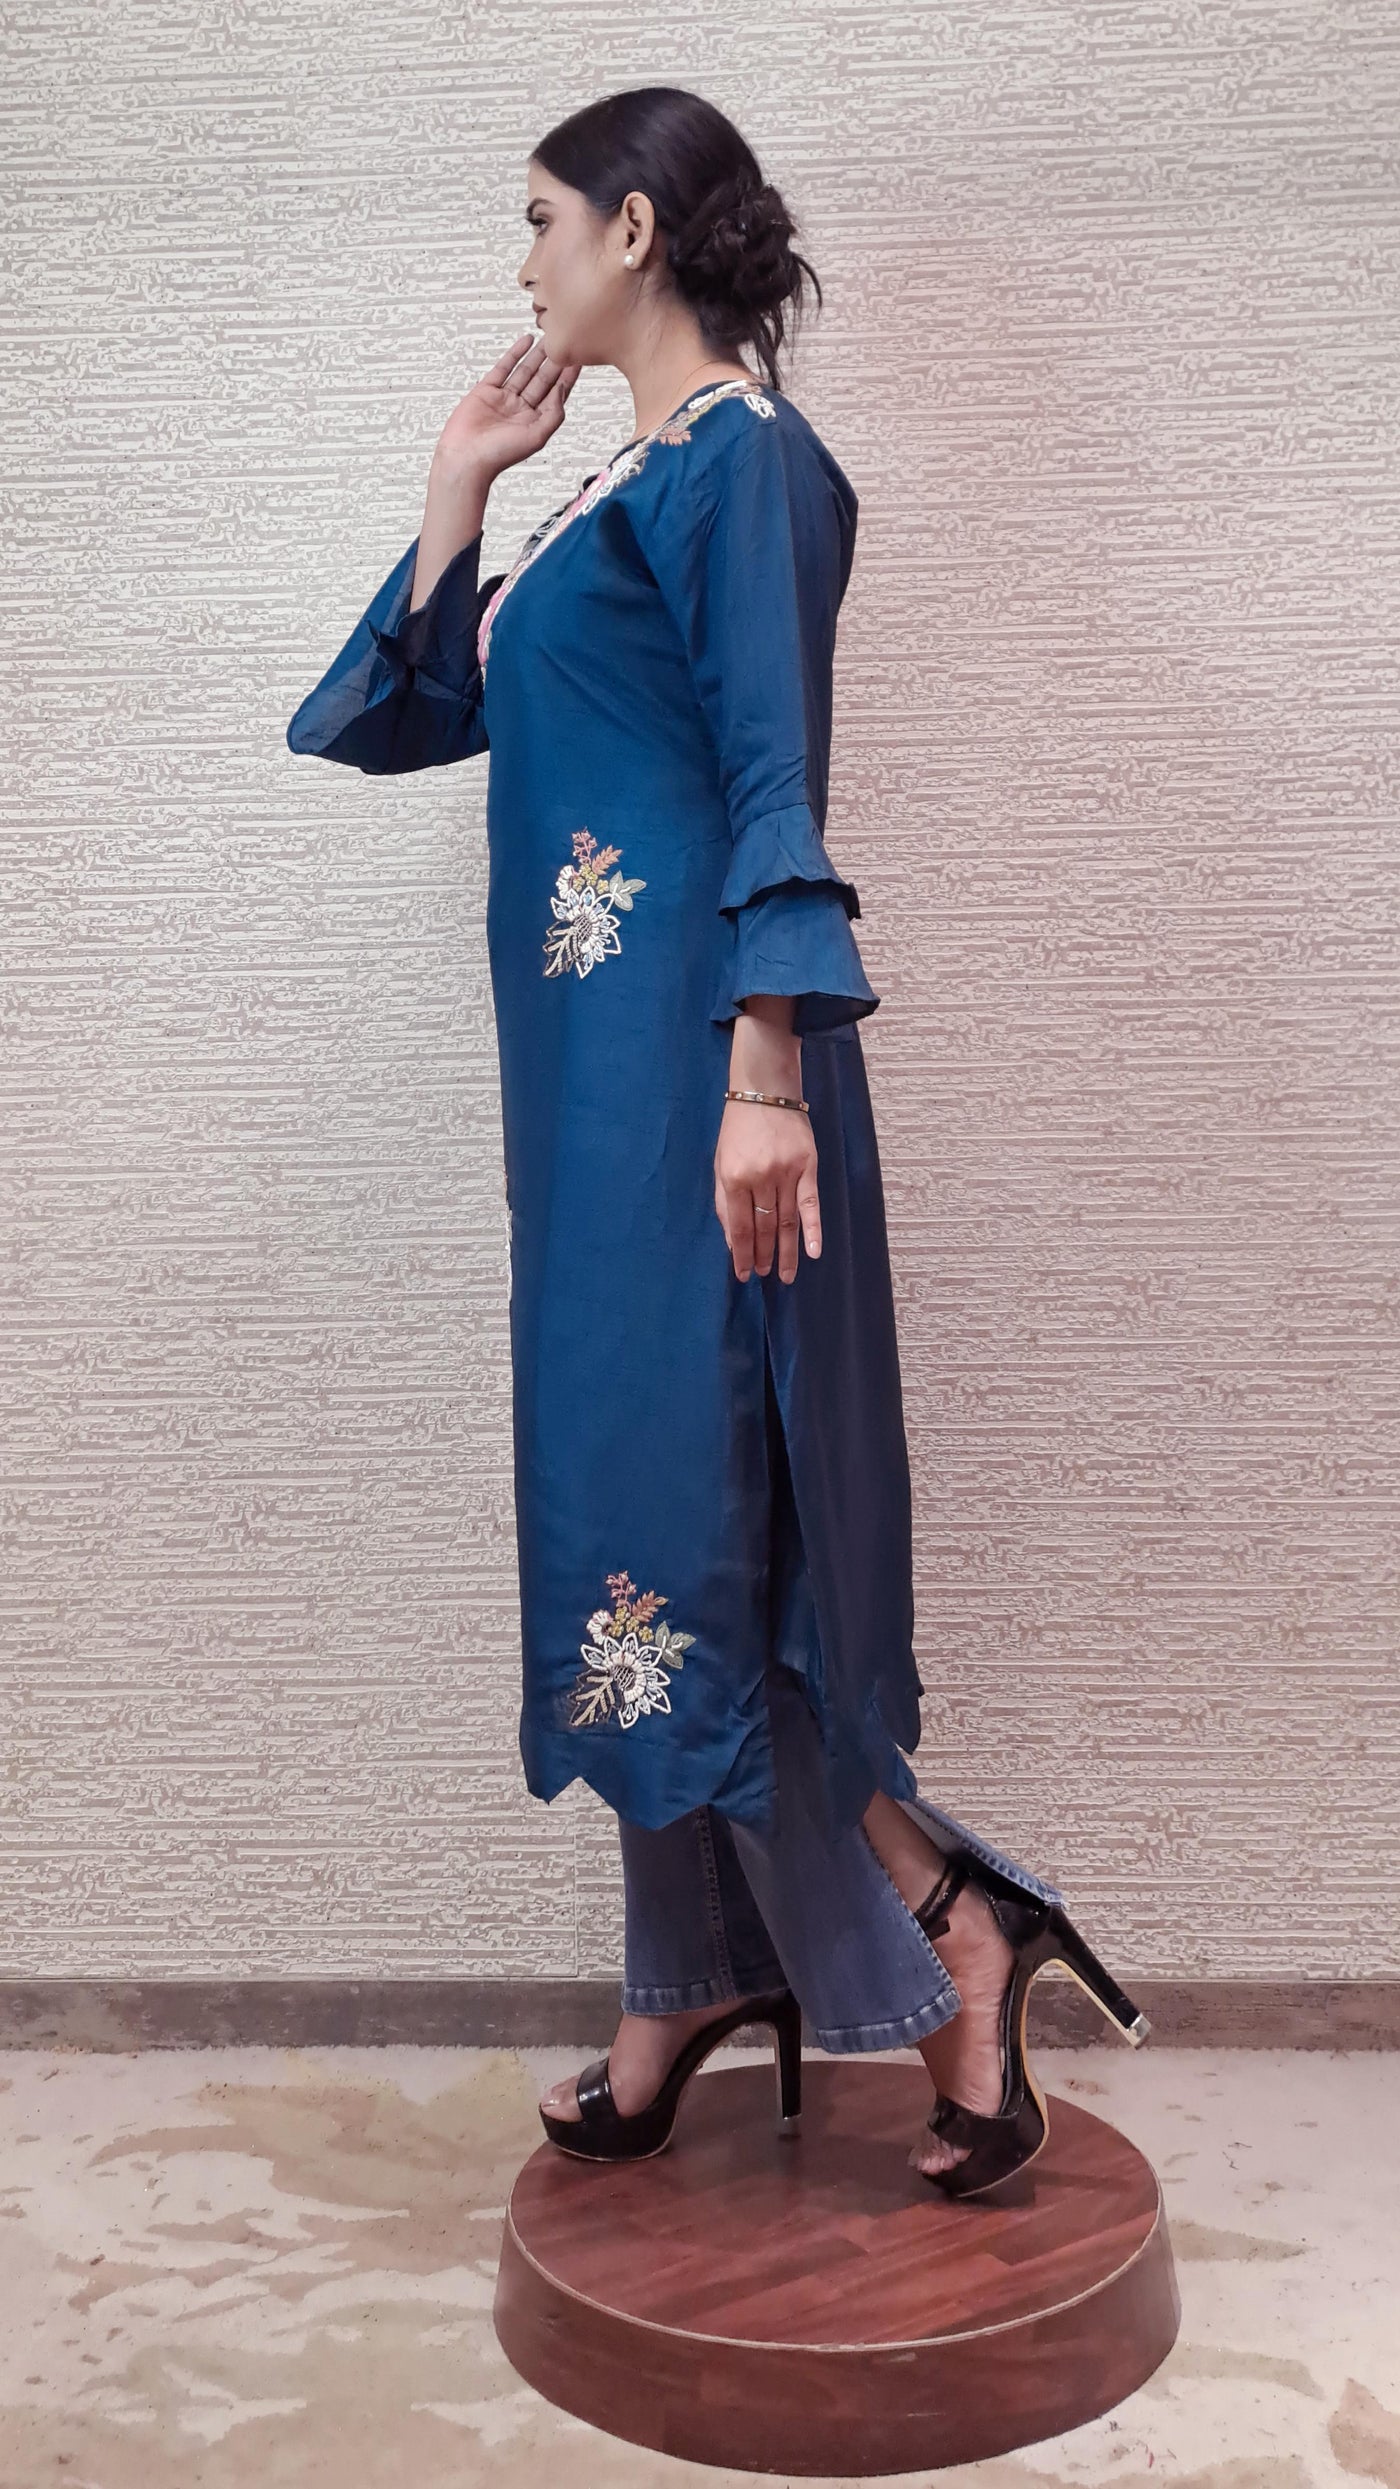 Stunning Deep Teal Blue Bell Sleeves Kurti With 3D Floral Embroidery